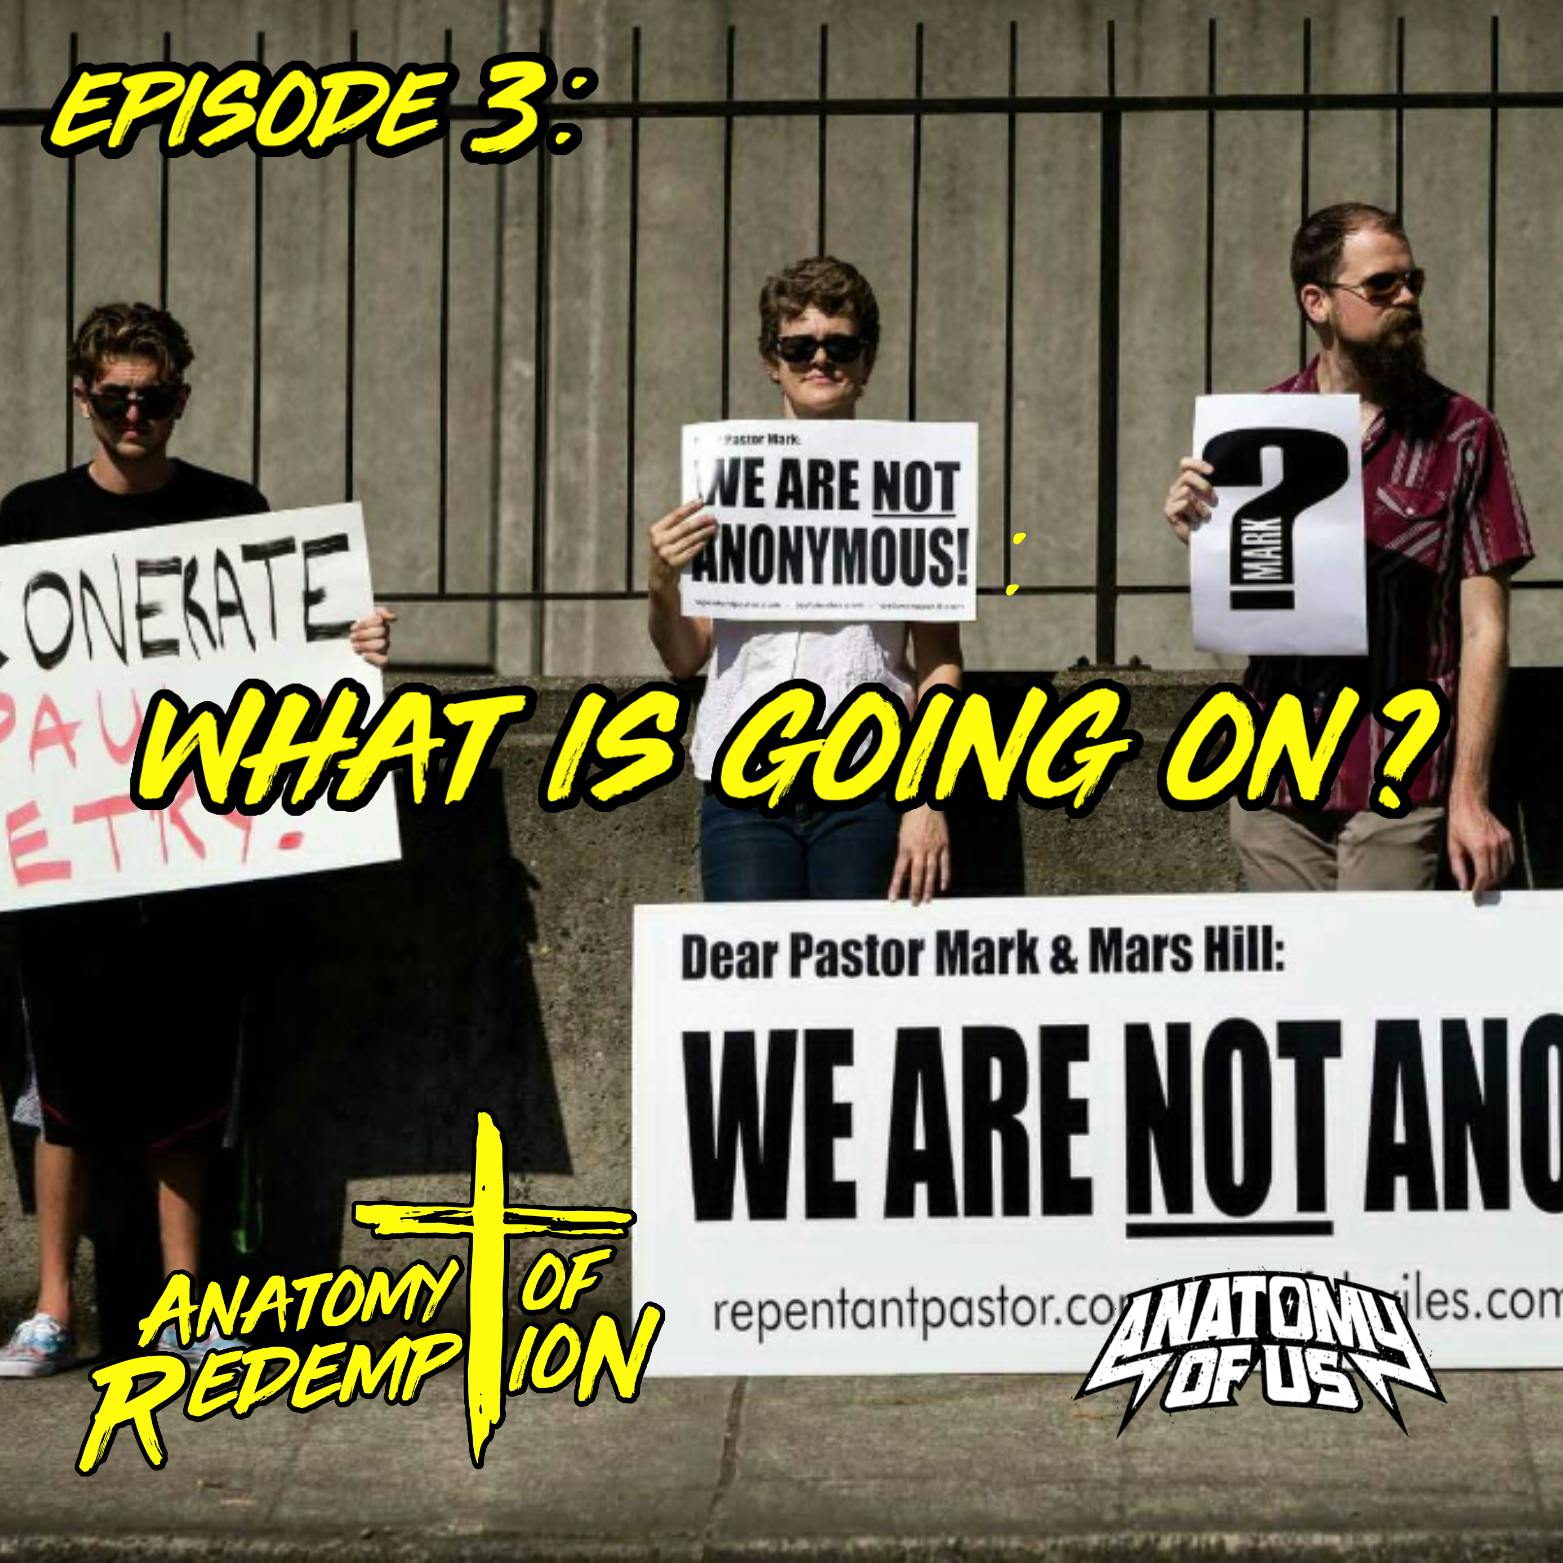 Anatomy of Redemption: Ep 3: What is Going On?